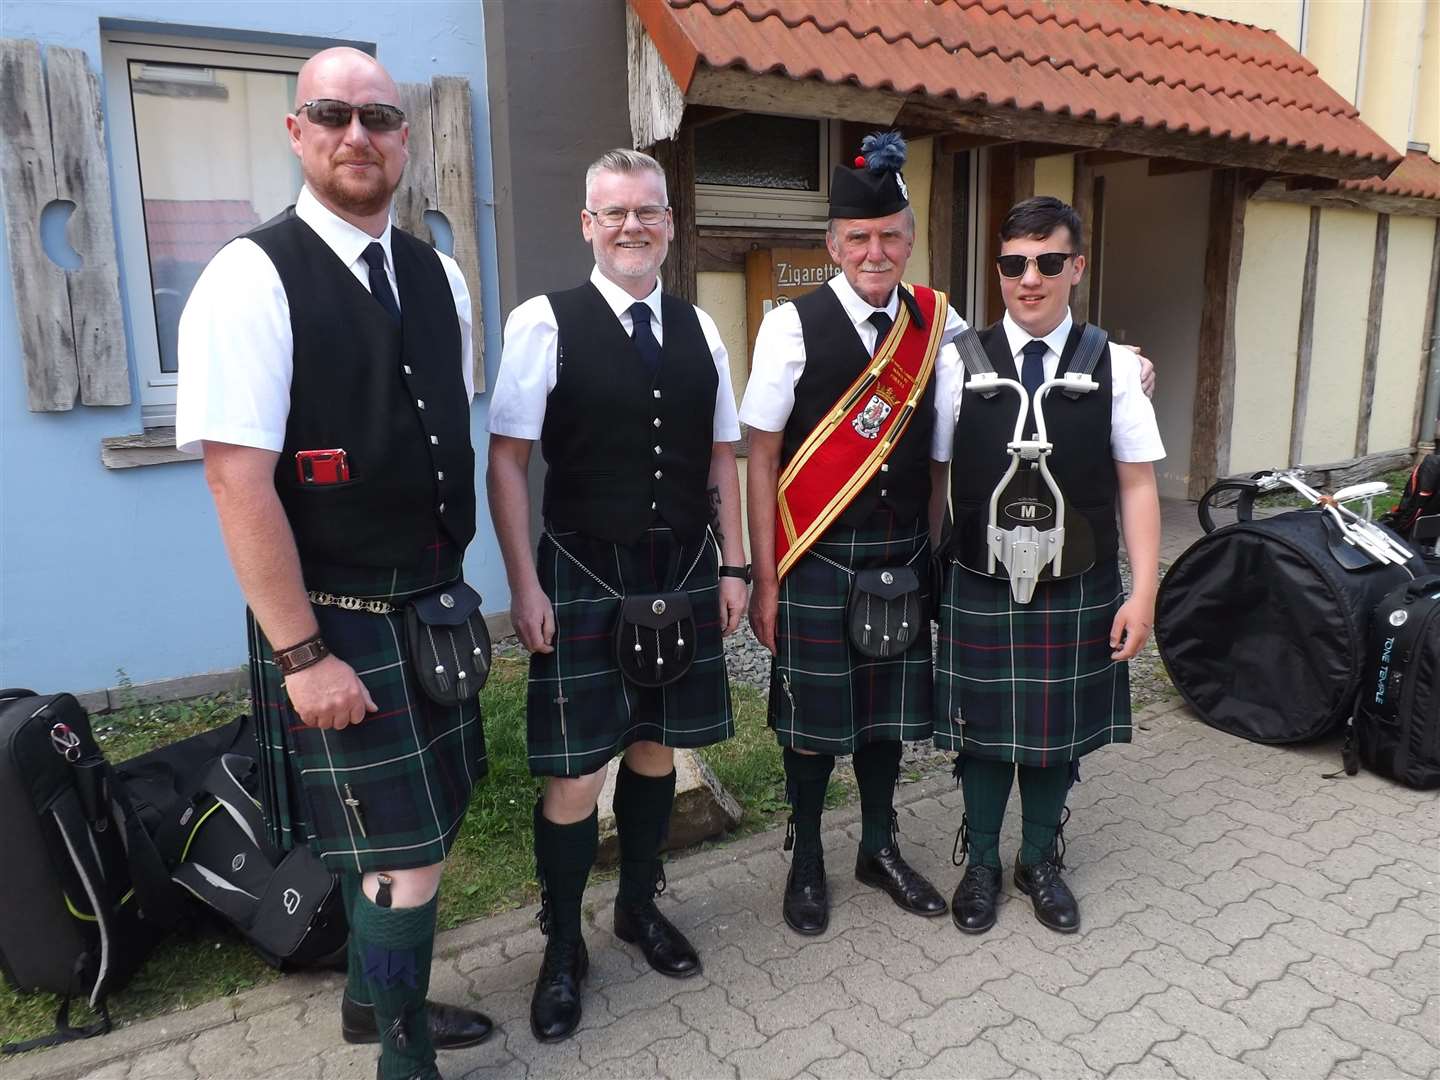 Pipe Major Johnathan Scott, William Young, DrumMajor Mike Munro and Tyler Smith in Goslar.